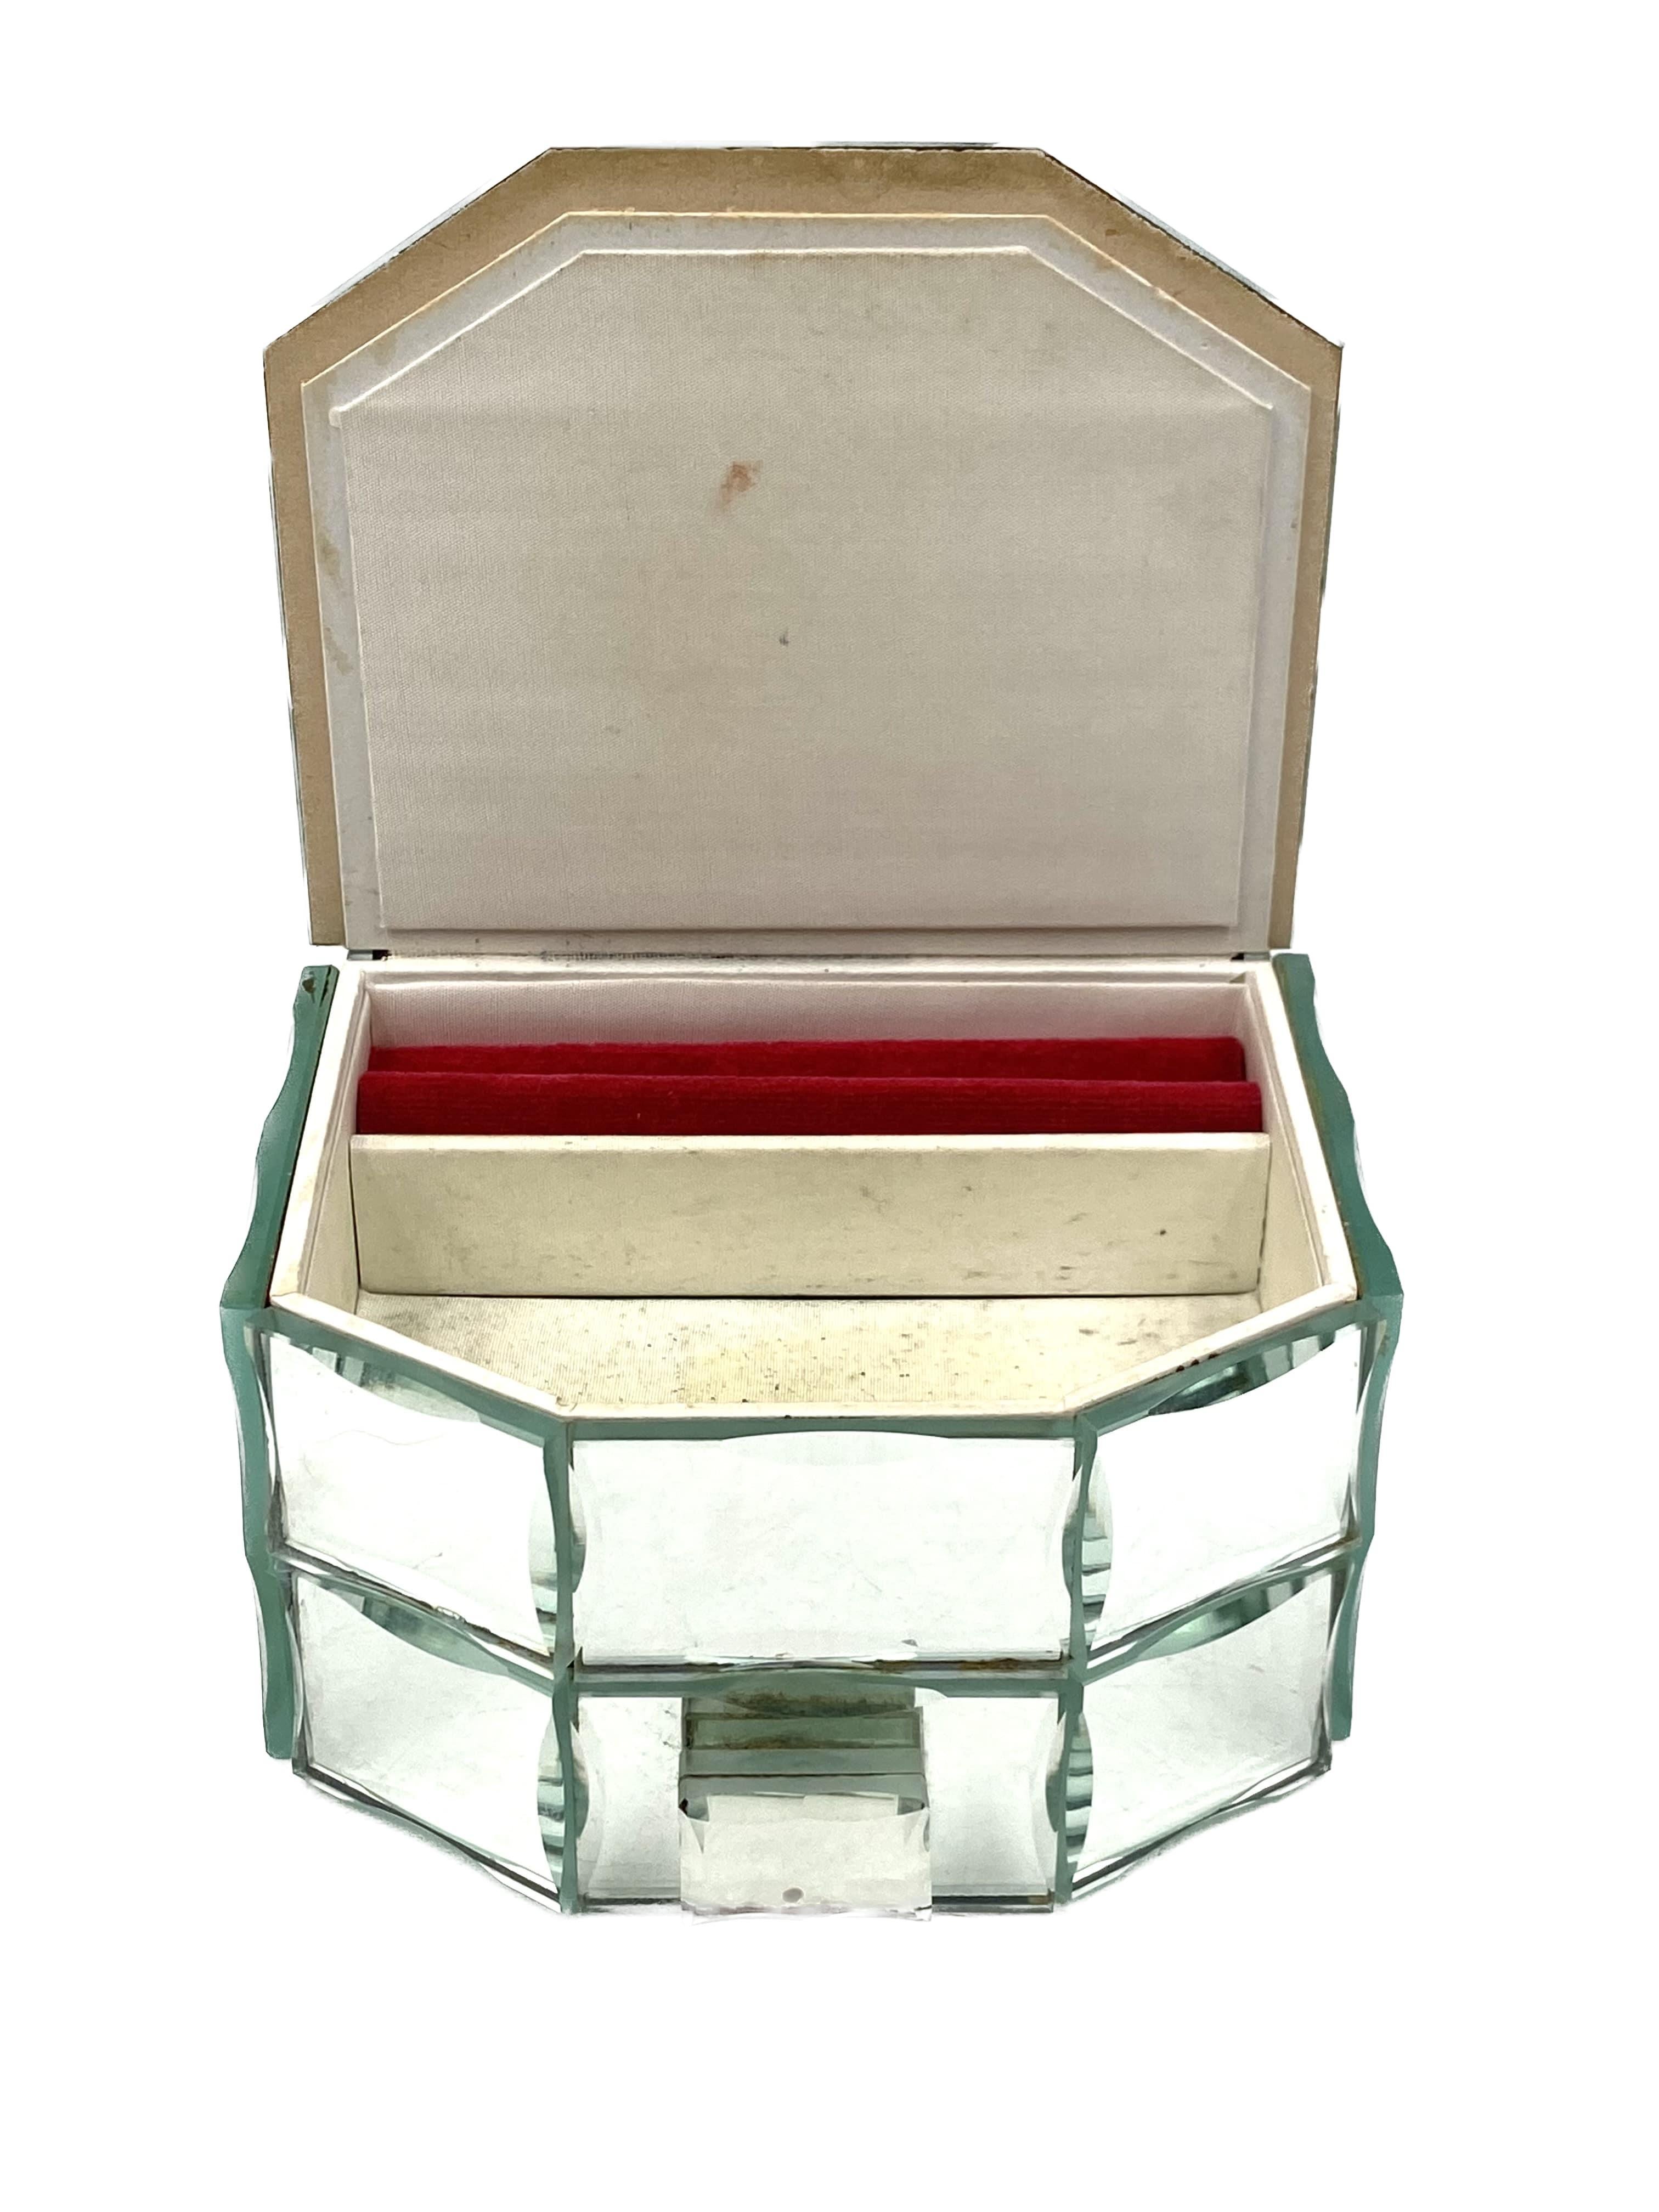 Midcentury Set of 3 Mirrored Jewelry Boxes, France, 1940s For Sale 6